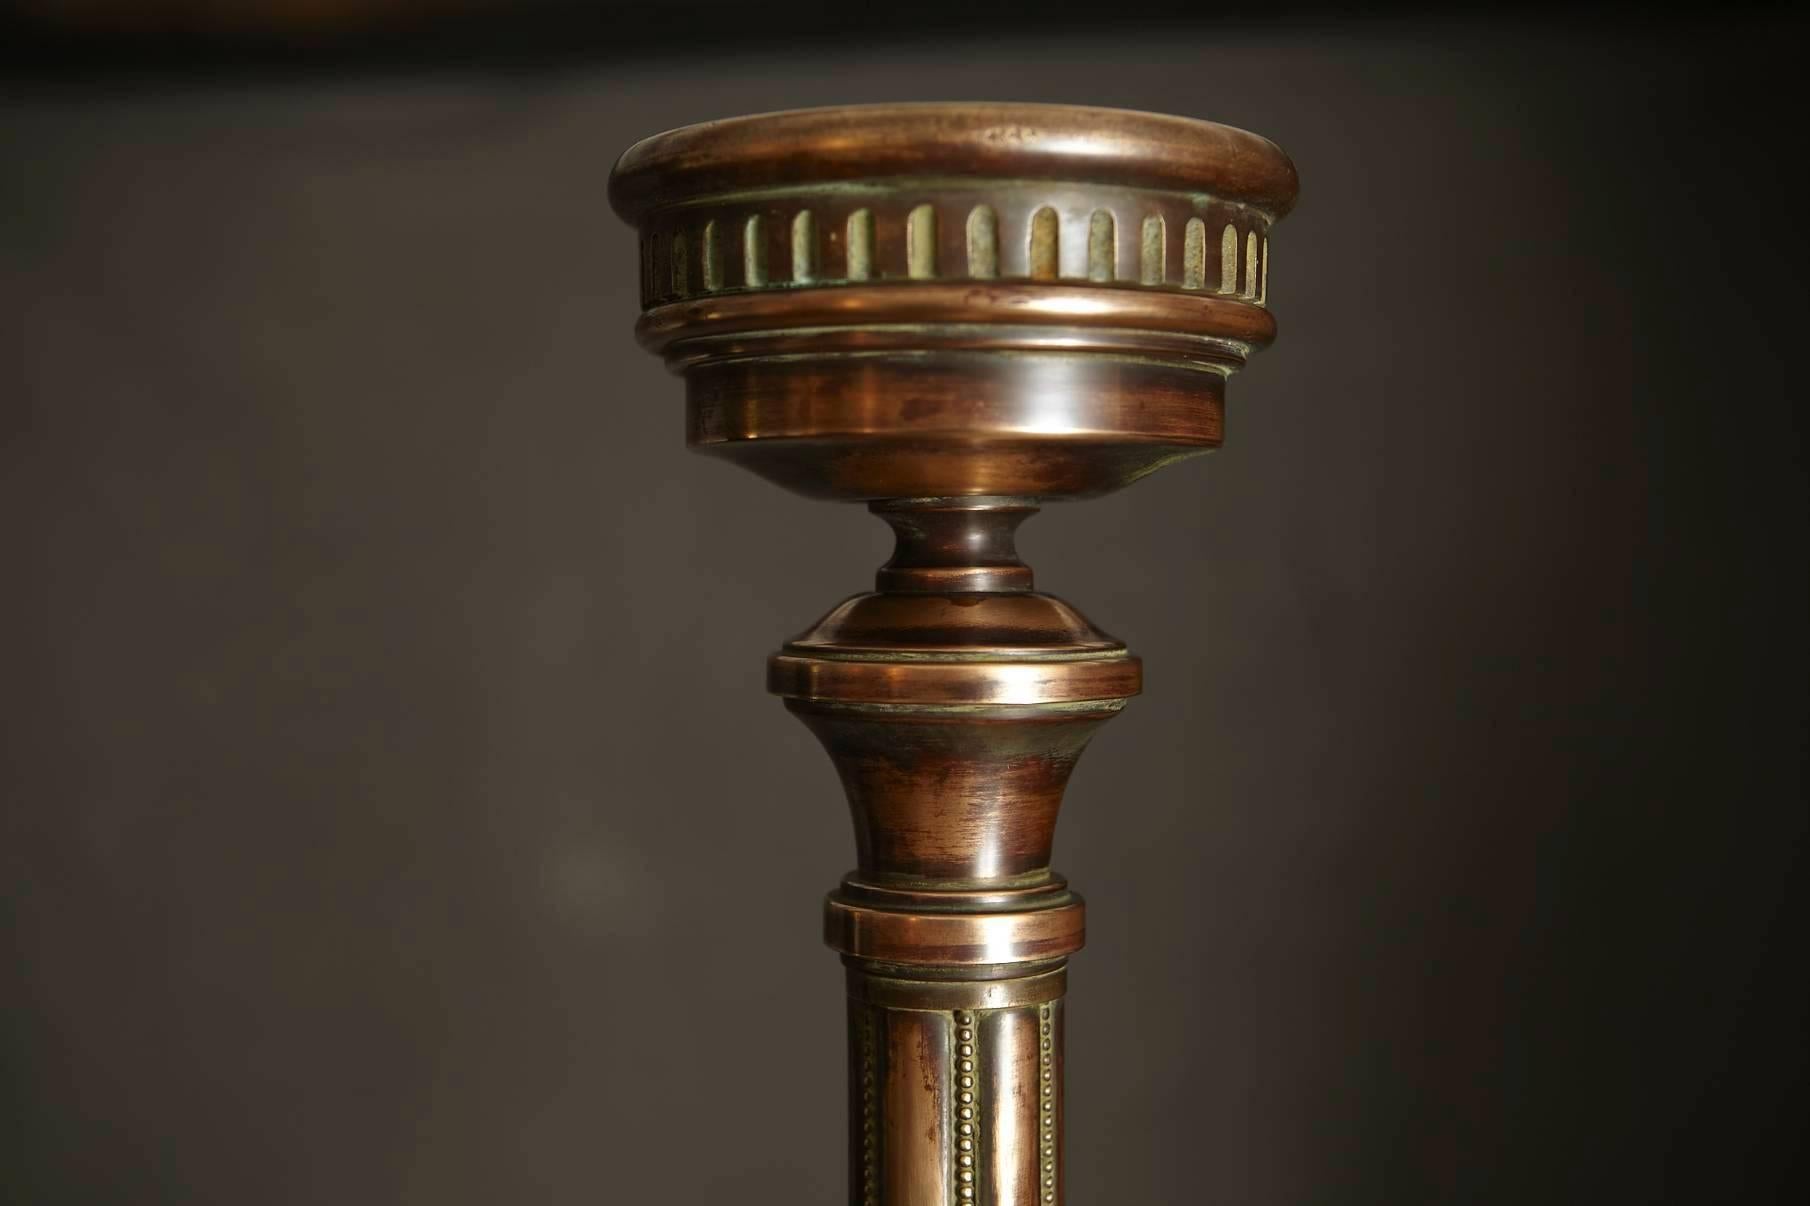 Early 20th century tall brass candleholder with great patina.
Solid and sturdy candlestick.